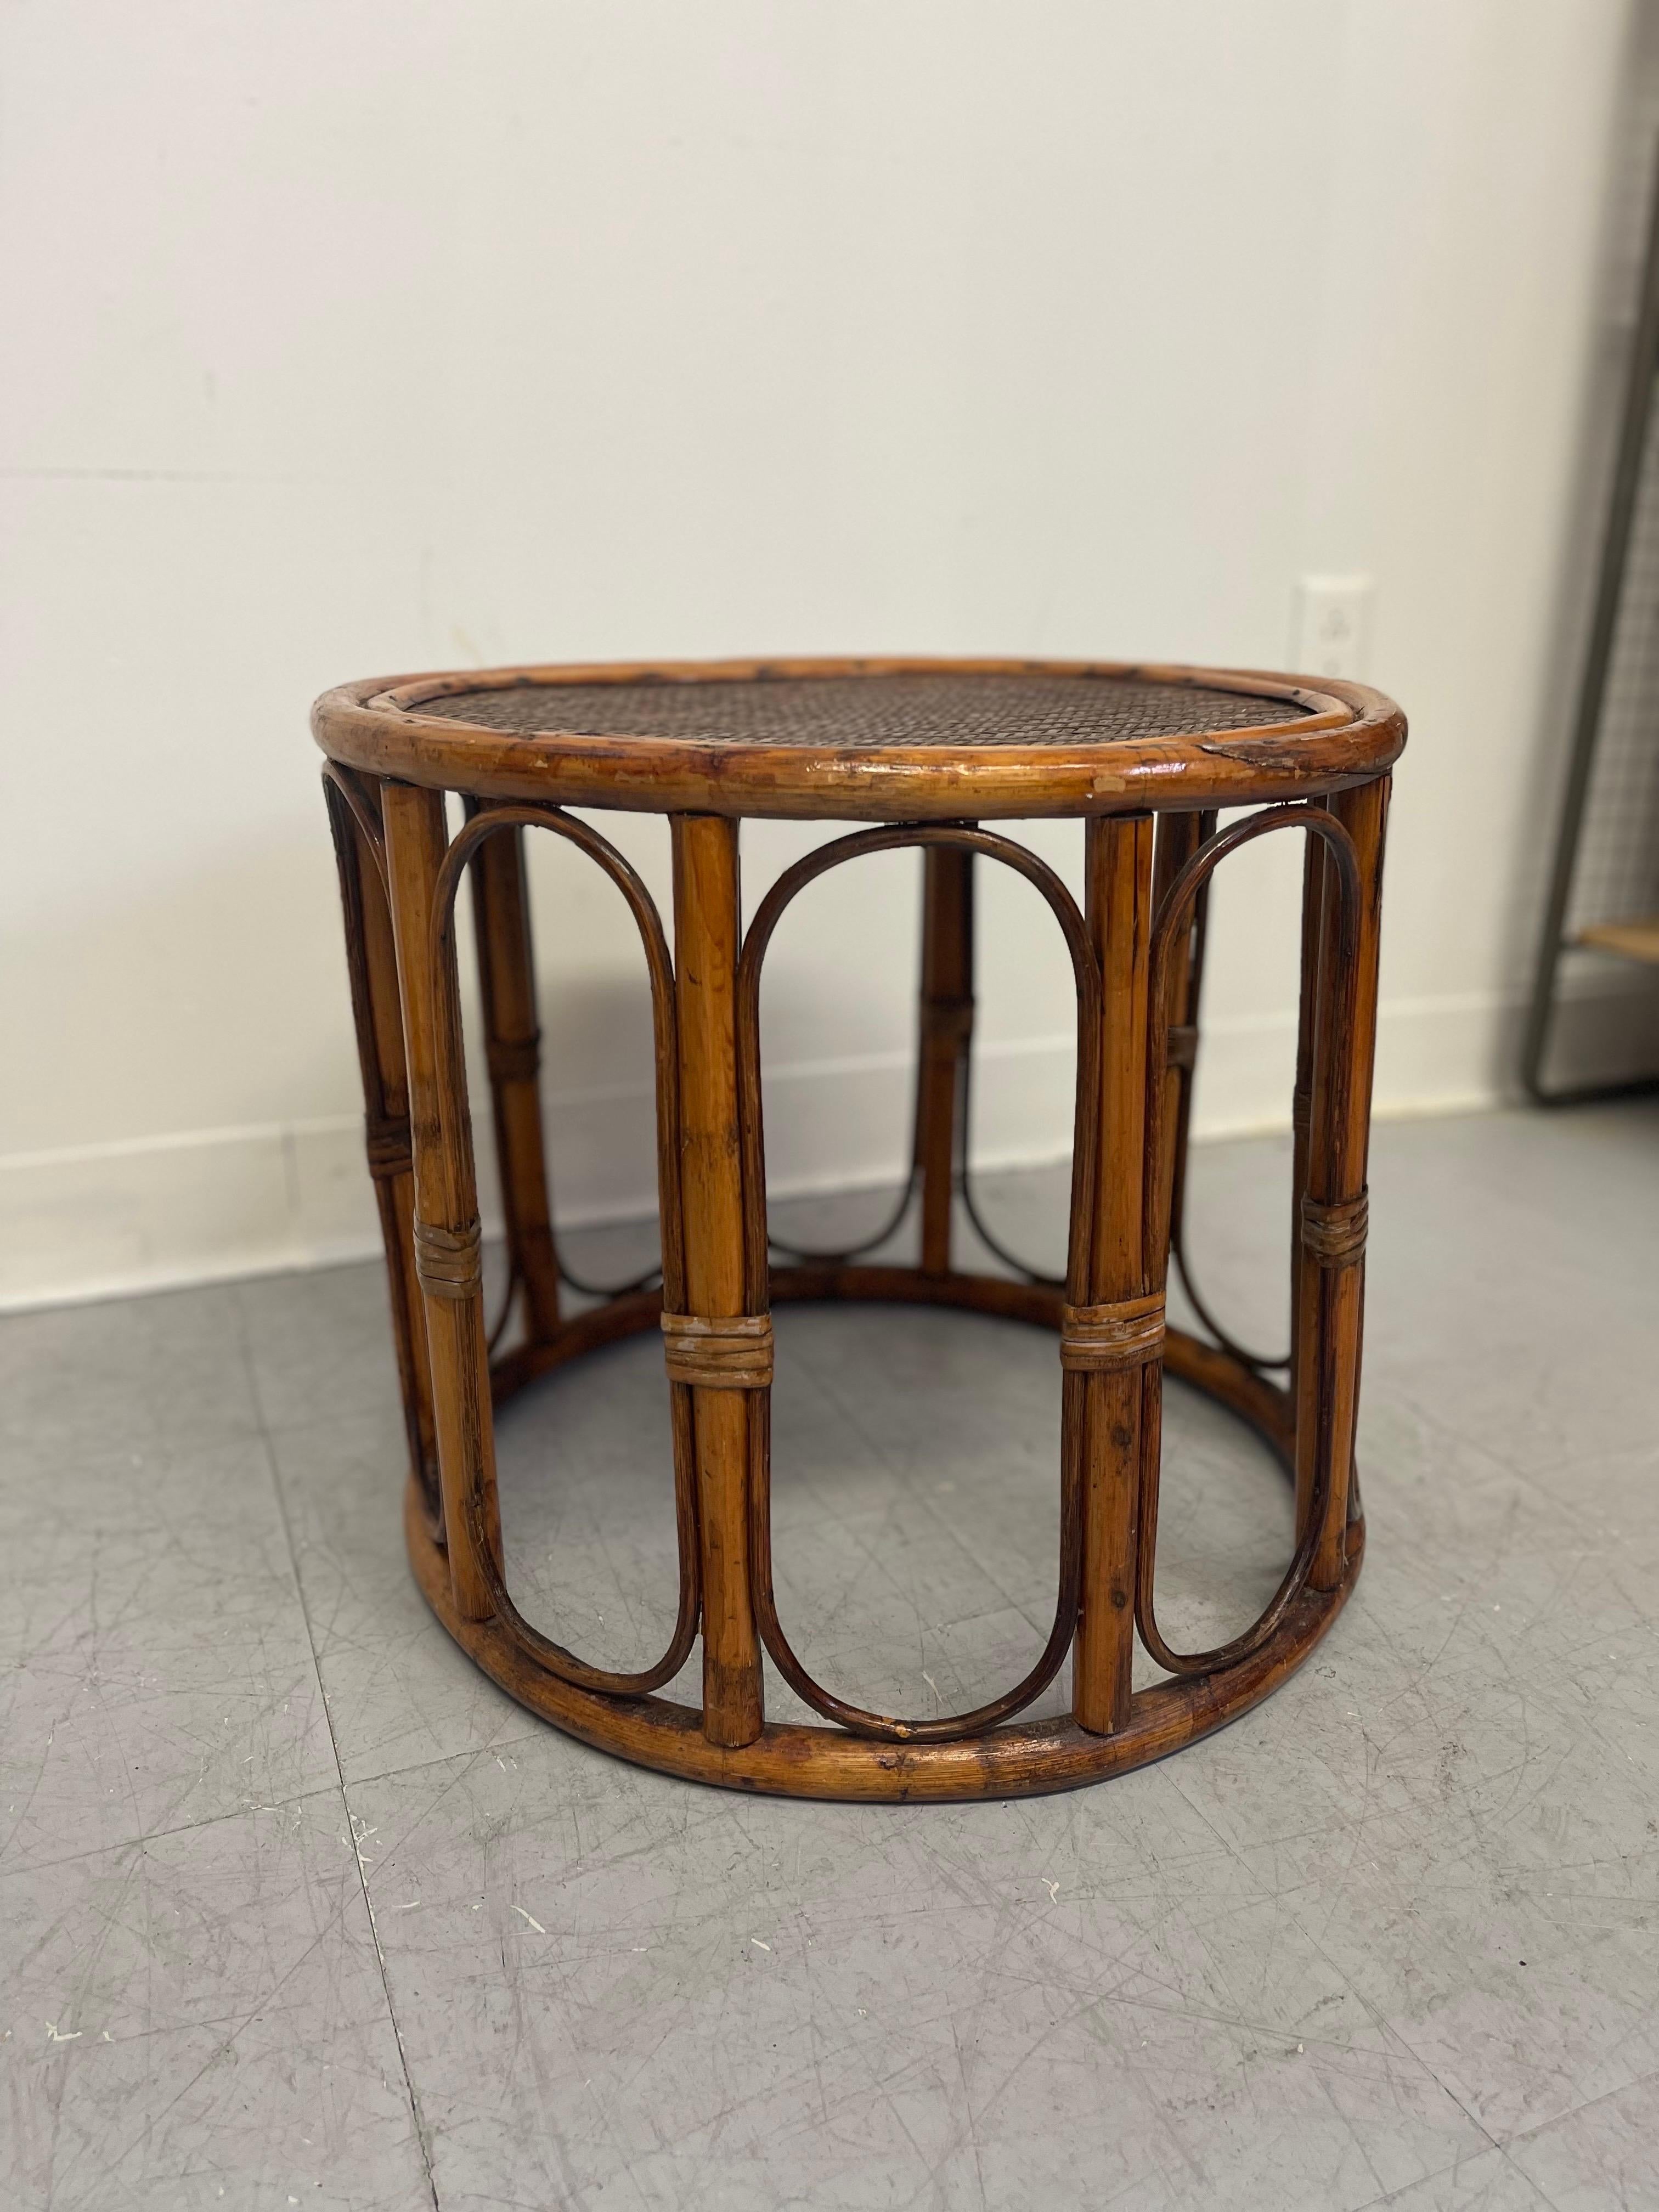 20th Century Vintage Rattan Caning Circular
Side Table For Sale